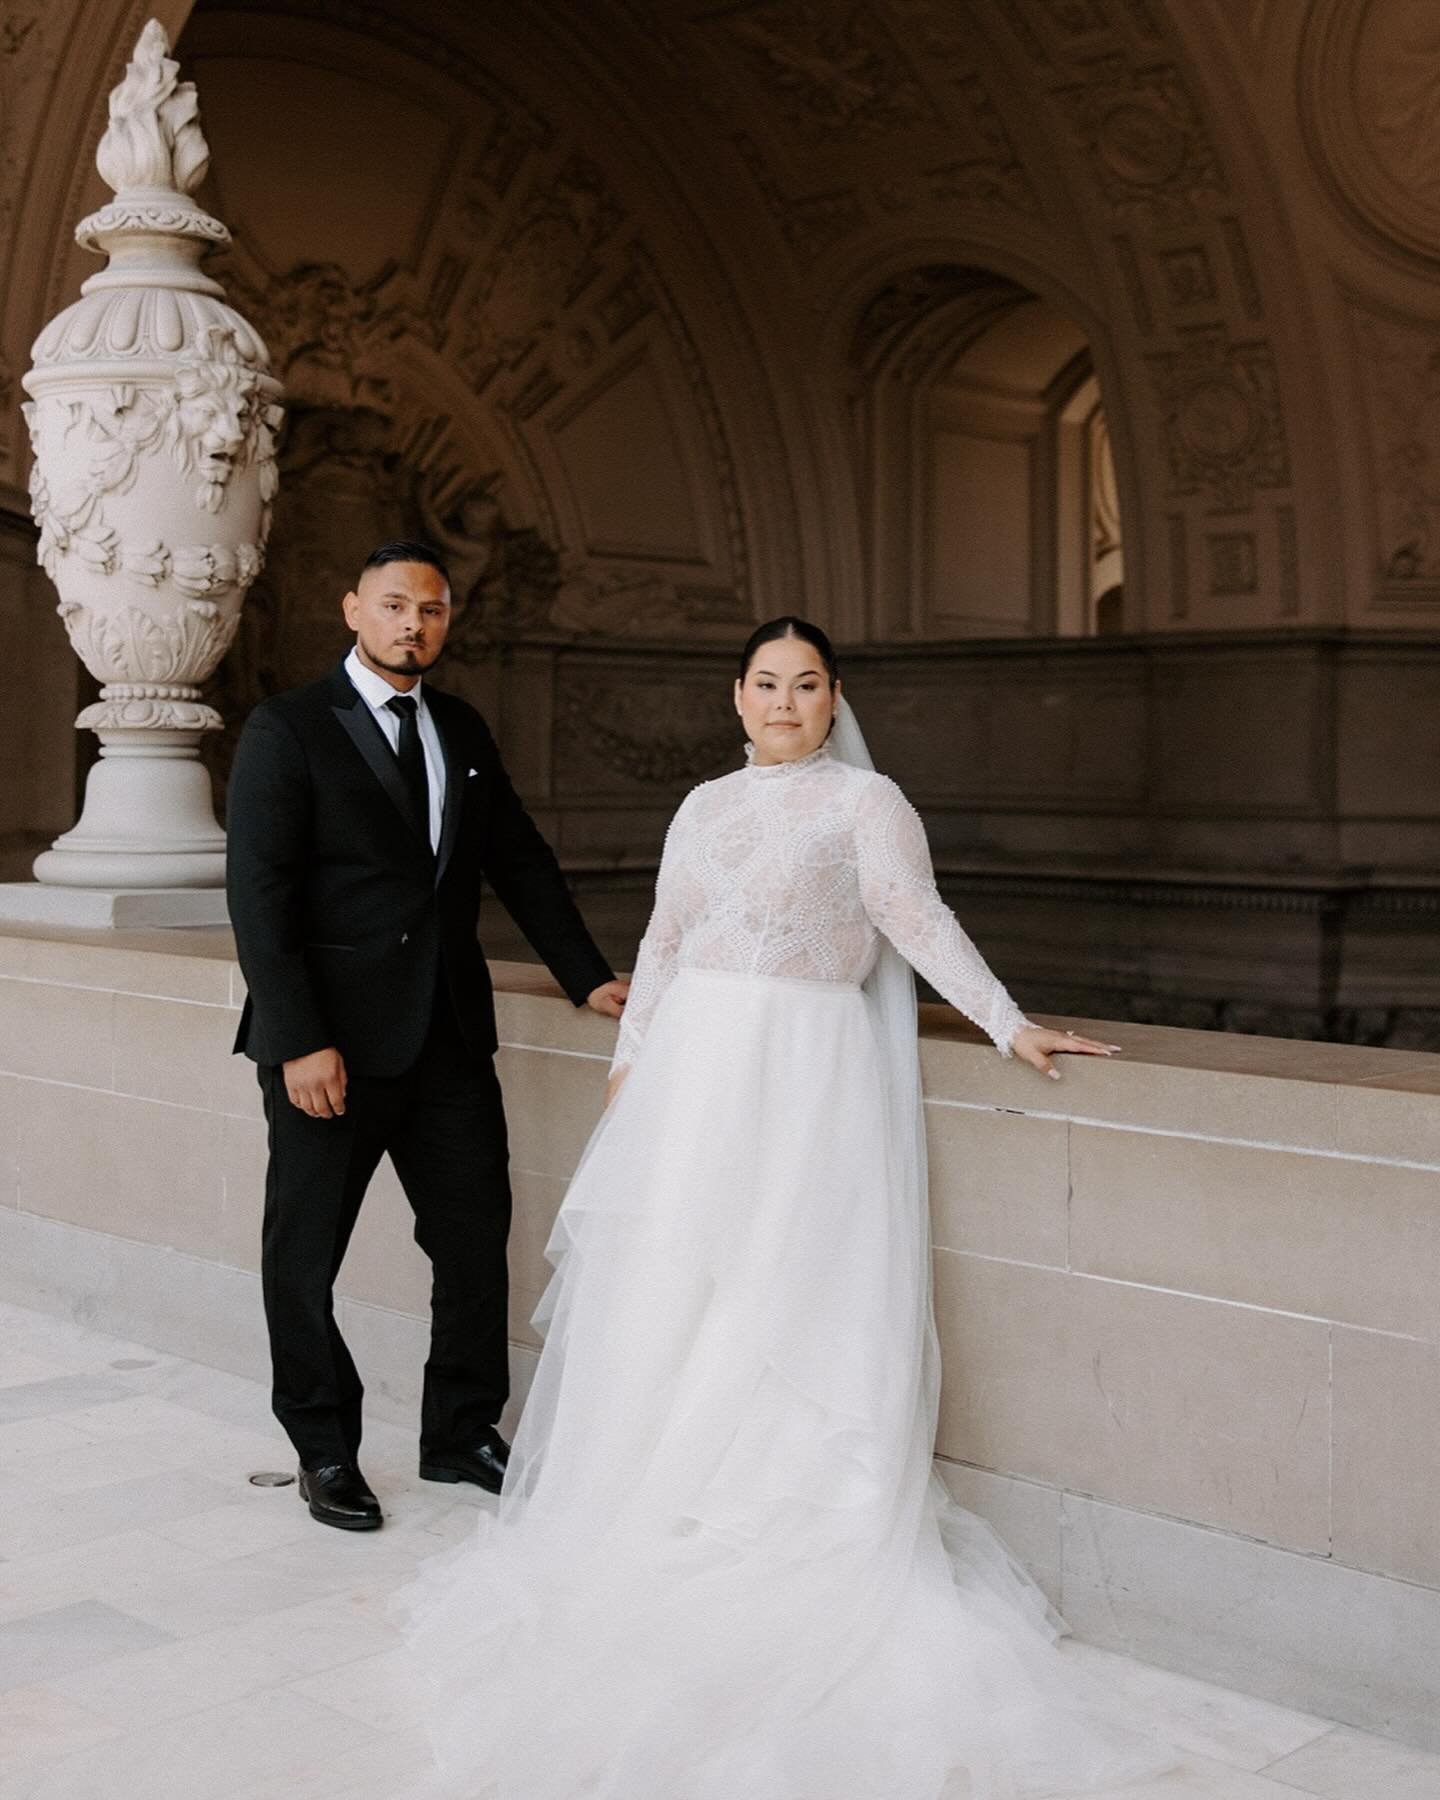 Ana + Noe celebrating their love with an intimate ceremony inside San Francisco City Hall🤍